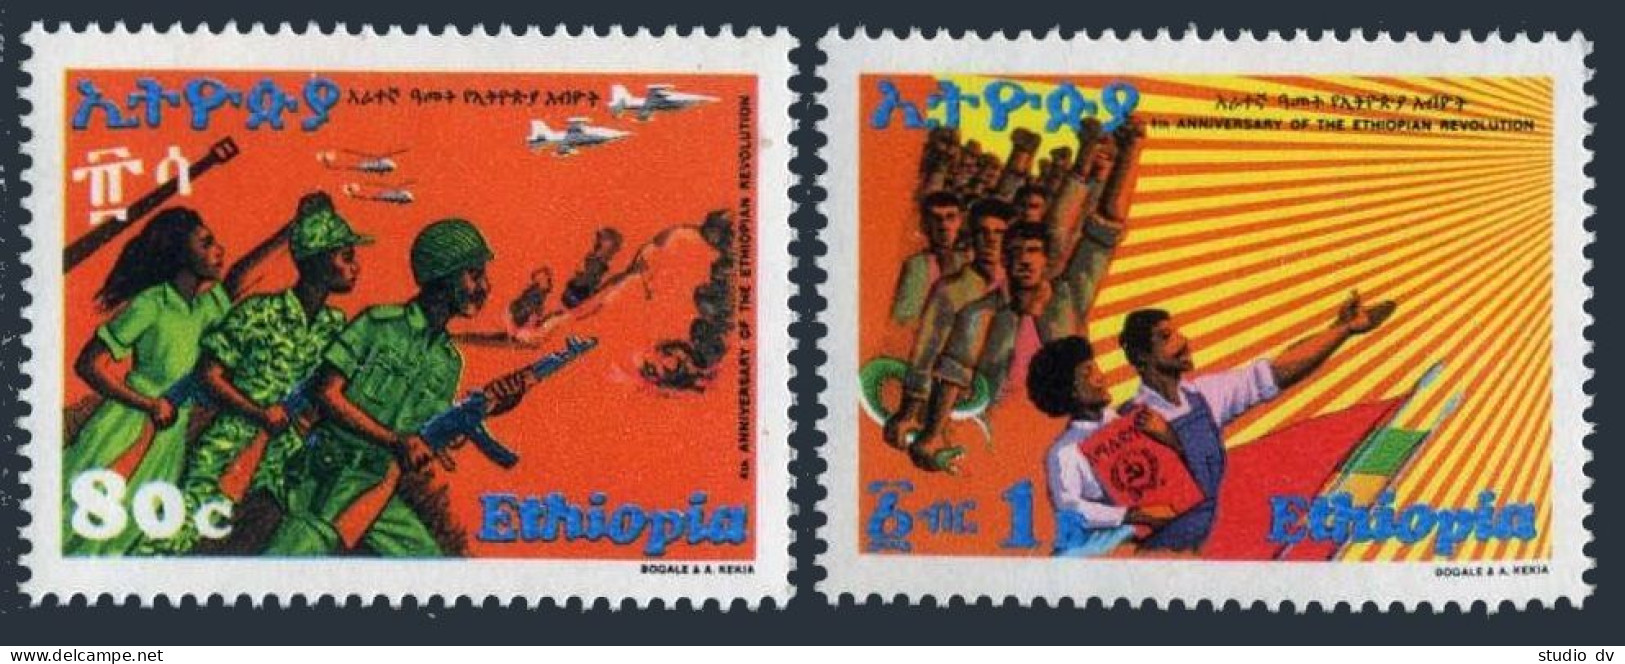 Ethiopia 894-895, MNH. Michel 980-981. Jet, Helicopters, Snake, Flags. 1978. - Ethiopie